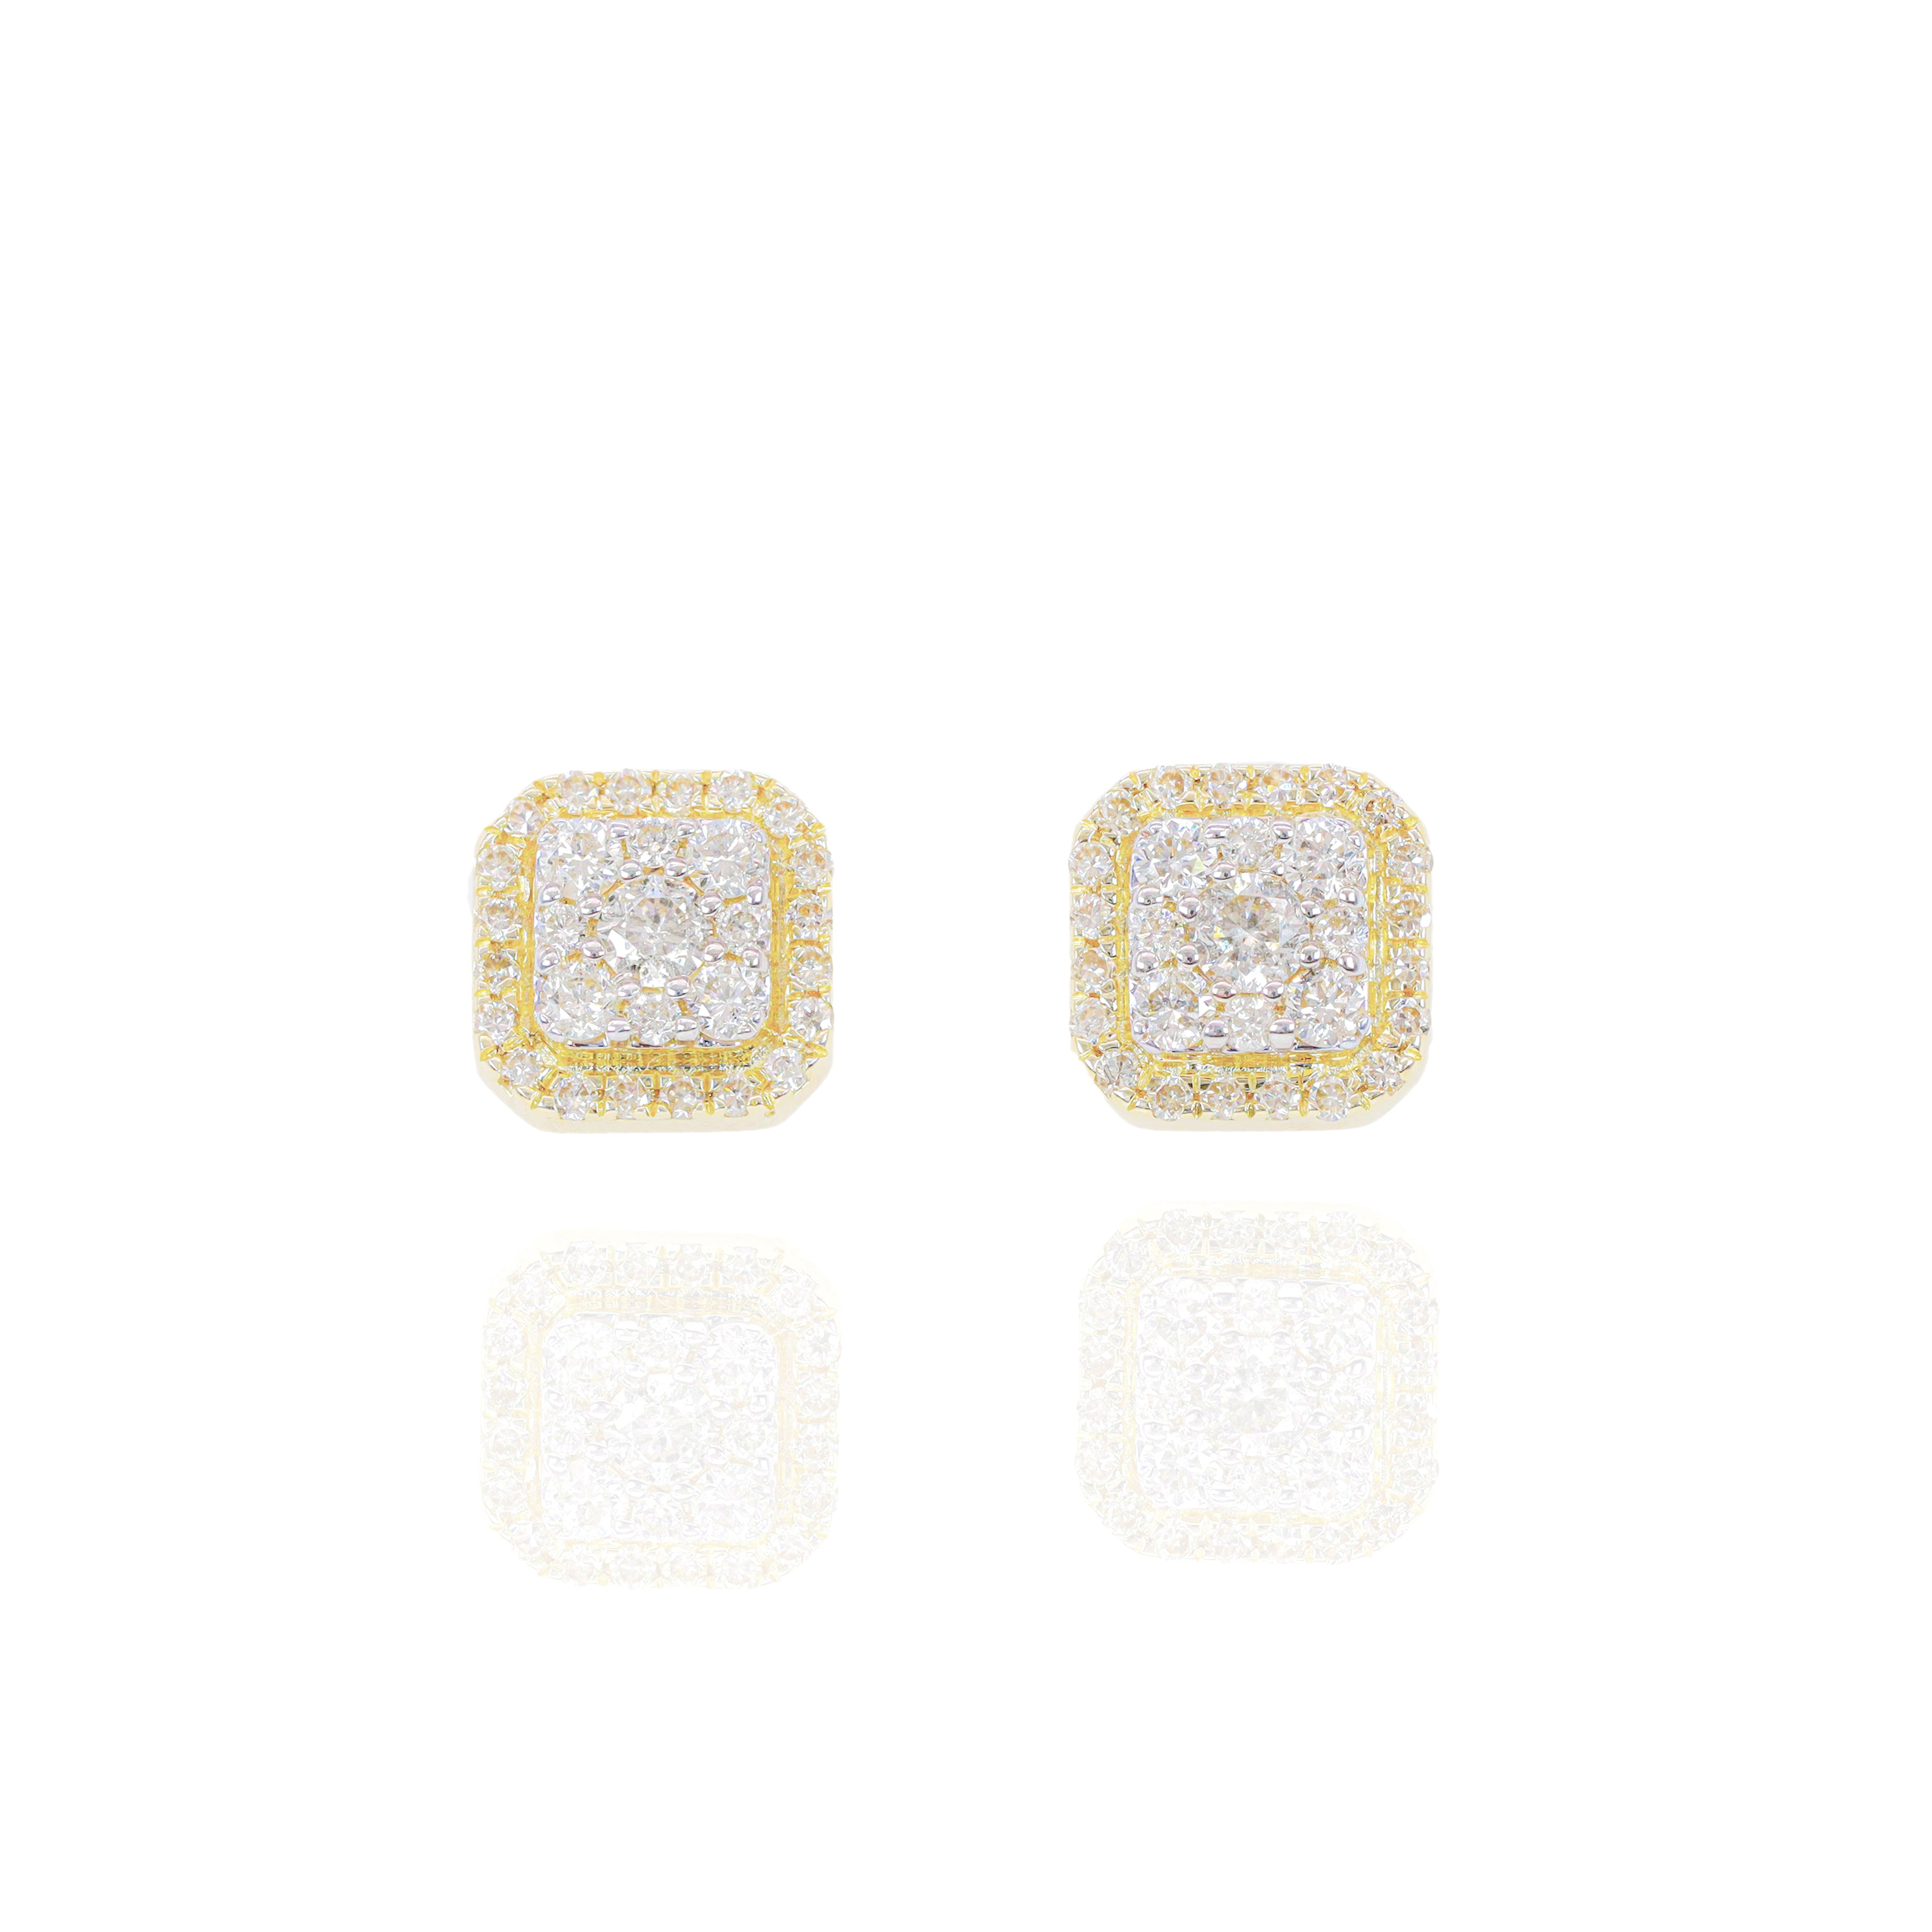 5 Pointer Center Two-Tone Square Diamond Cluster Earrings